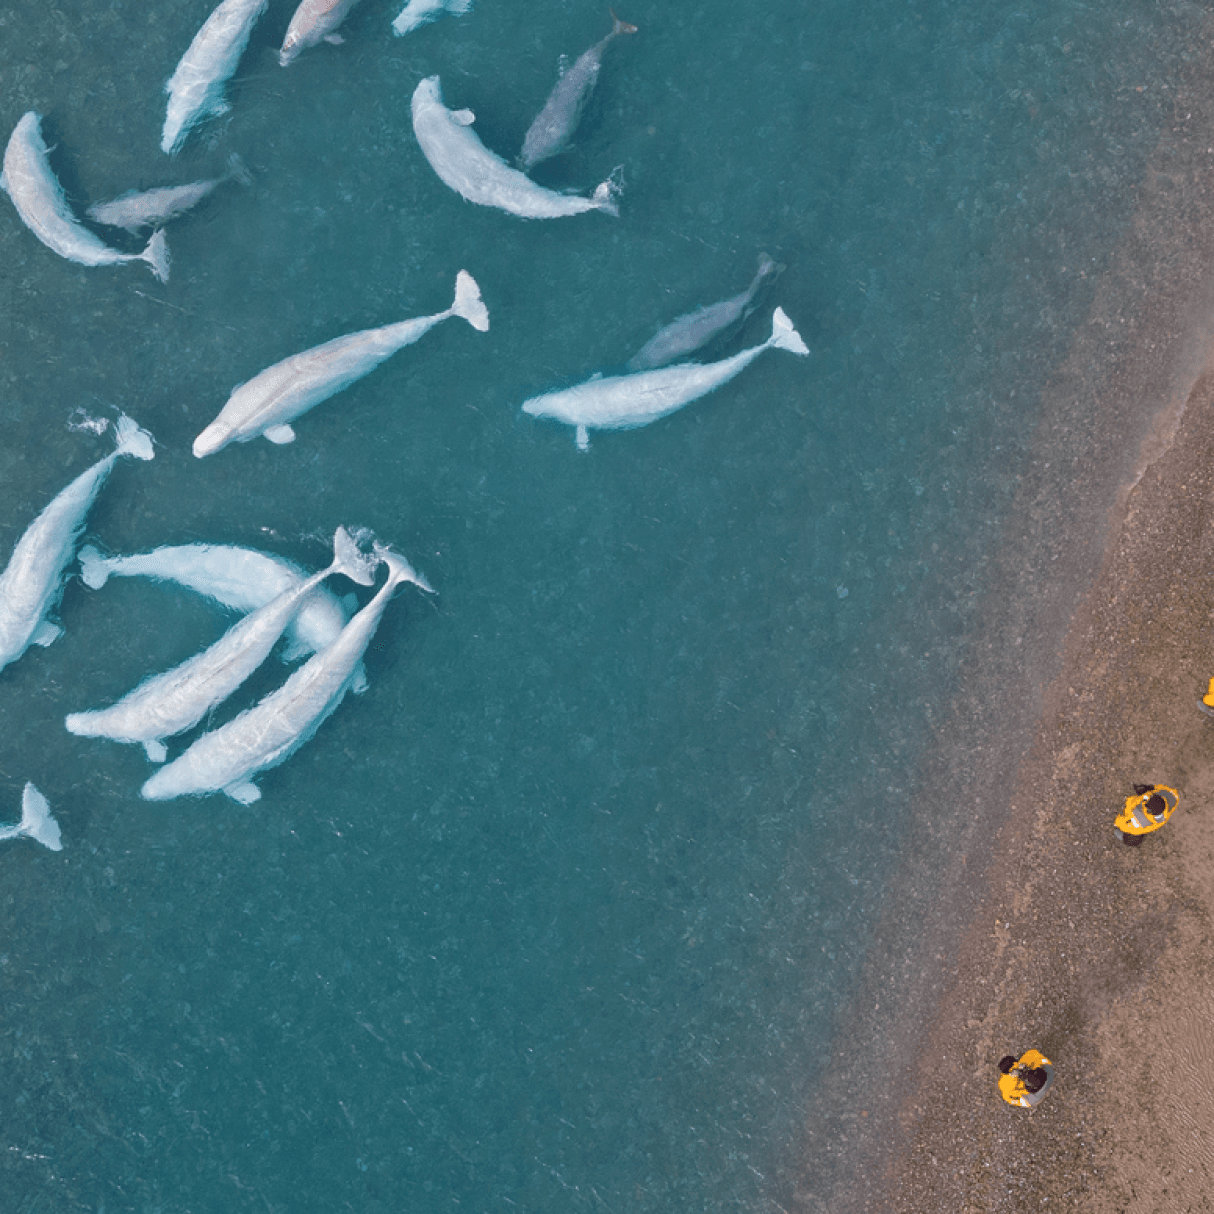 Guests and belugas near Arctic Watch